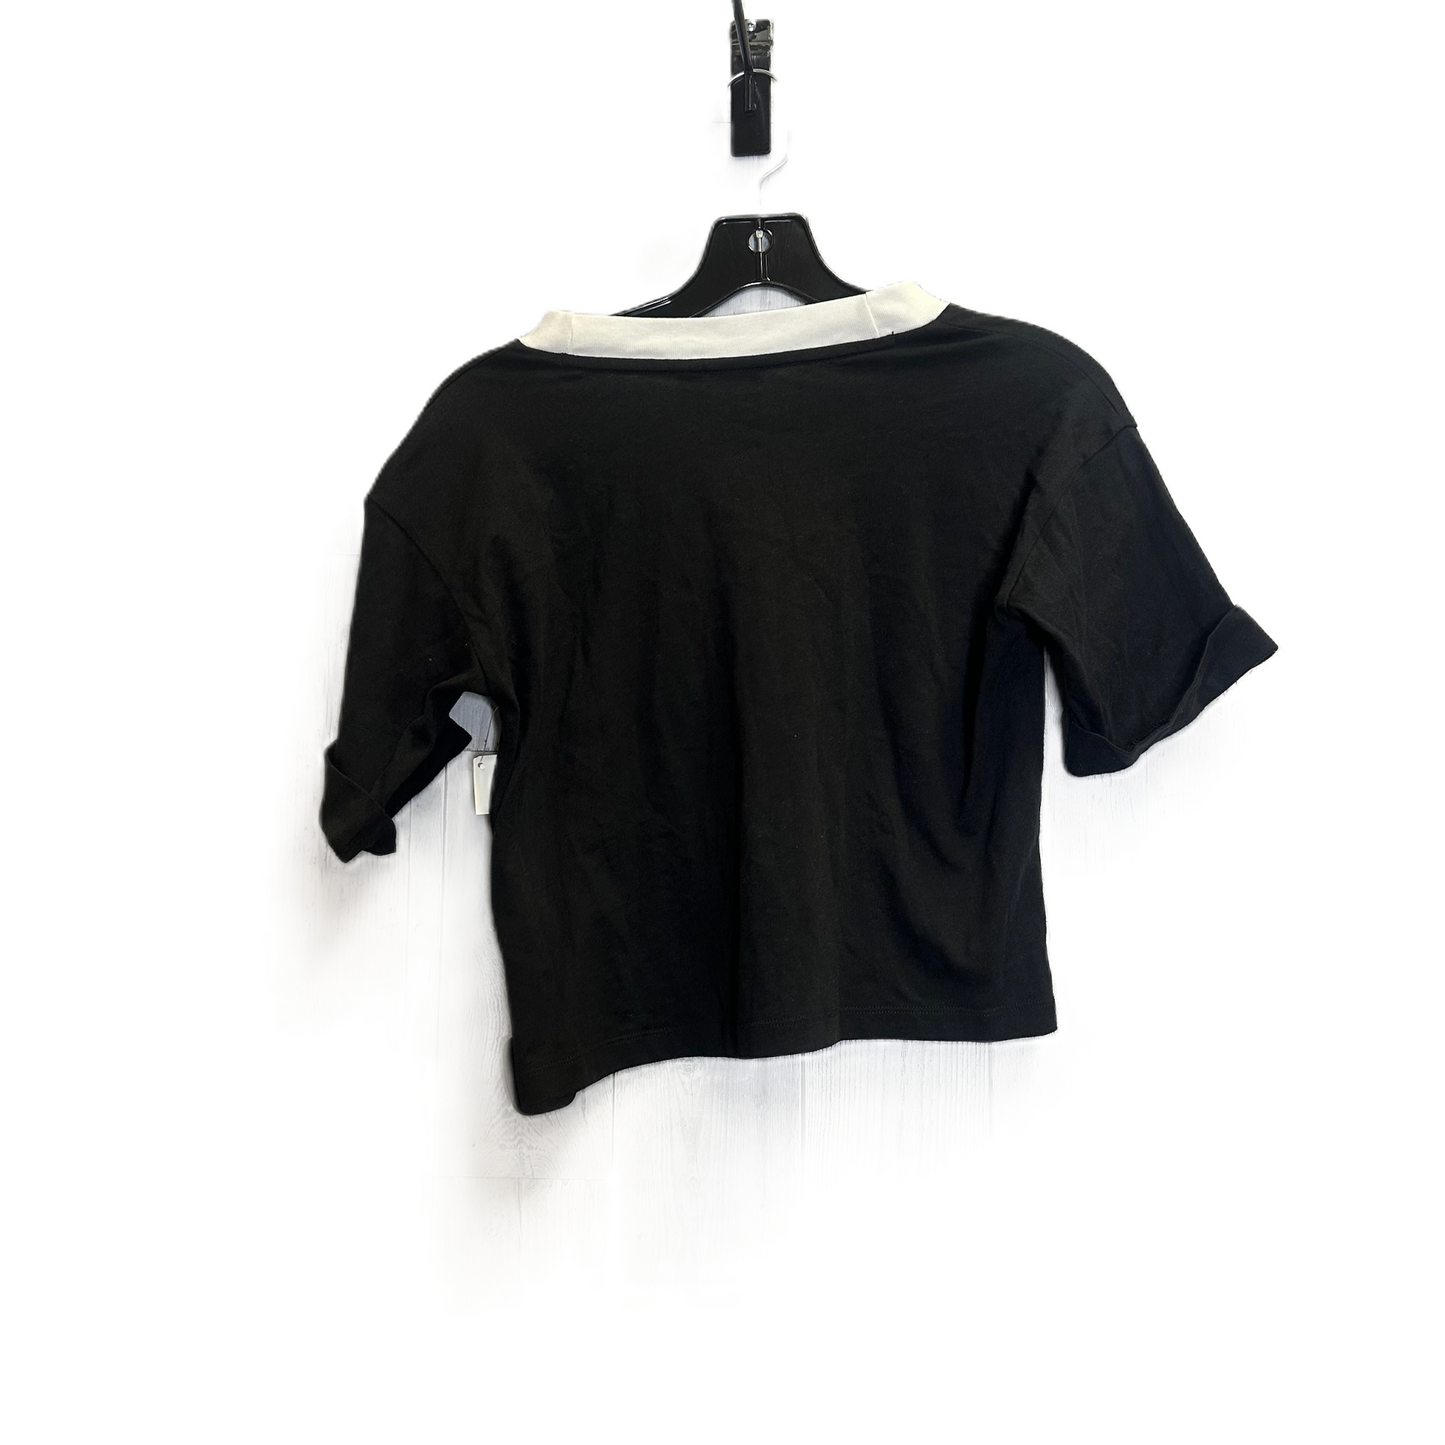 Black Athletic Top Short Sleeve By Adidas, Size: S